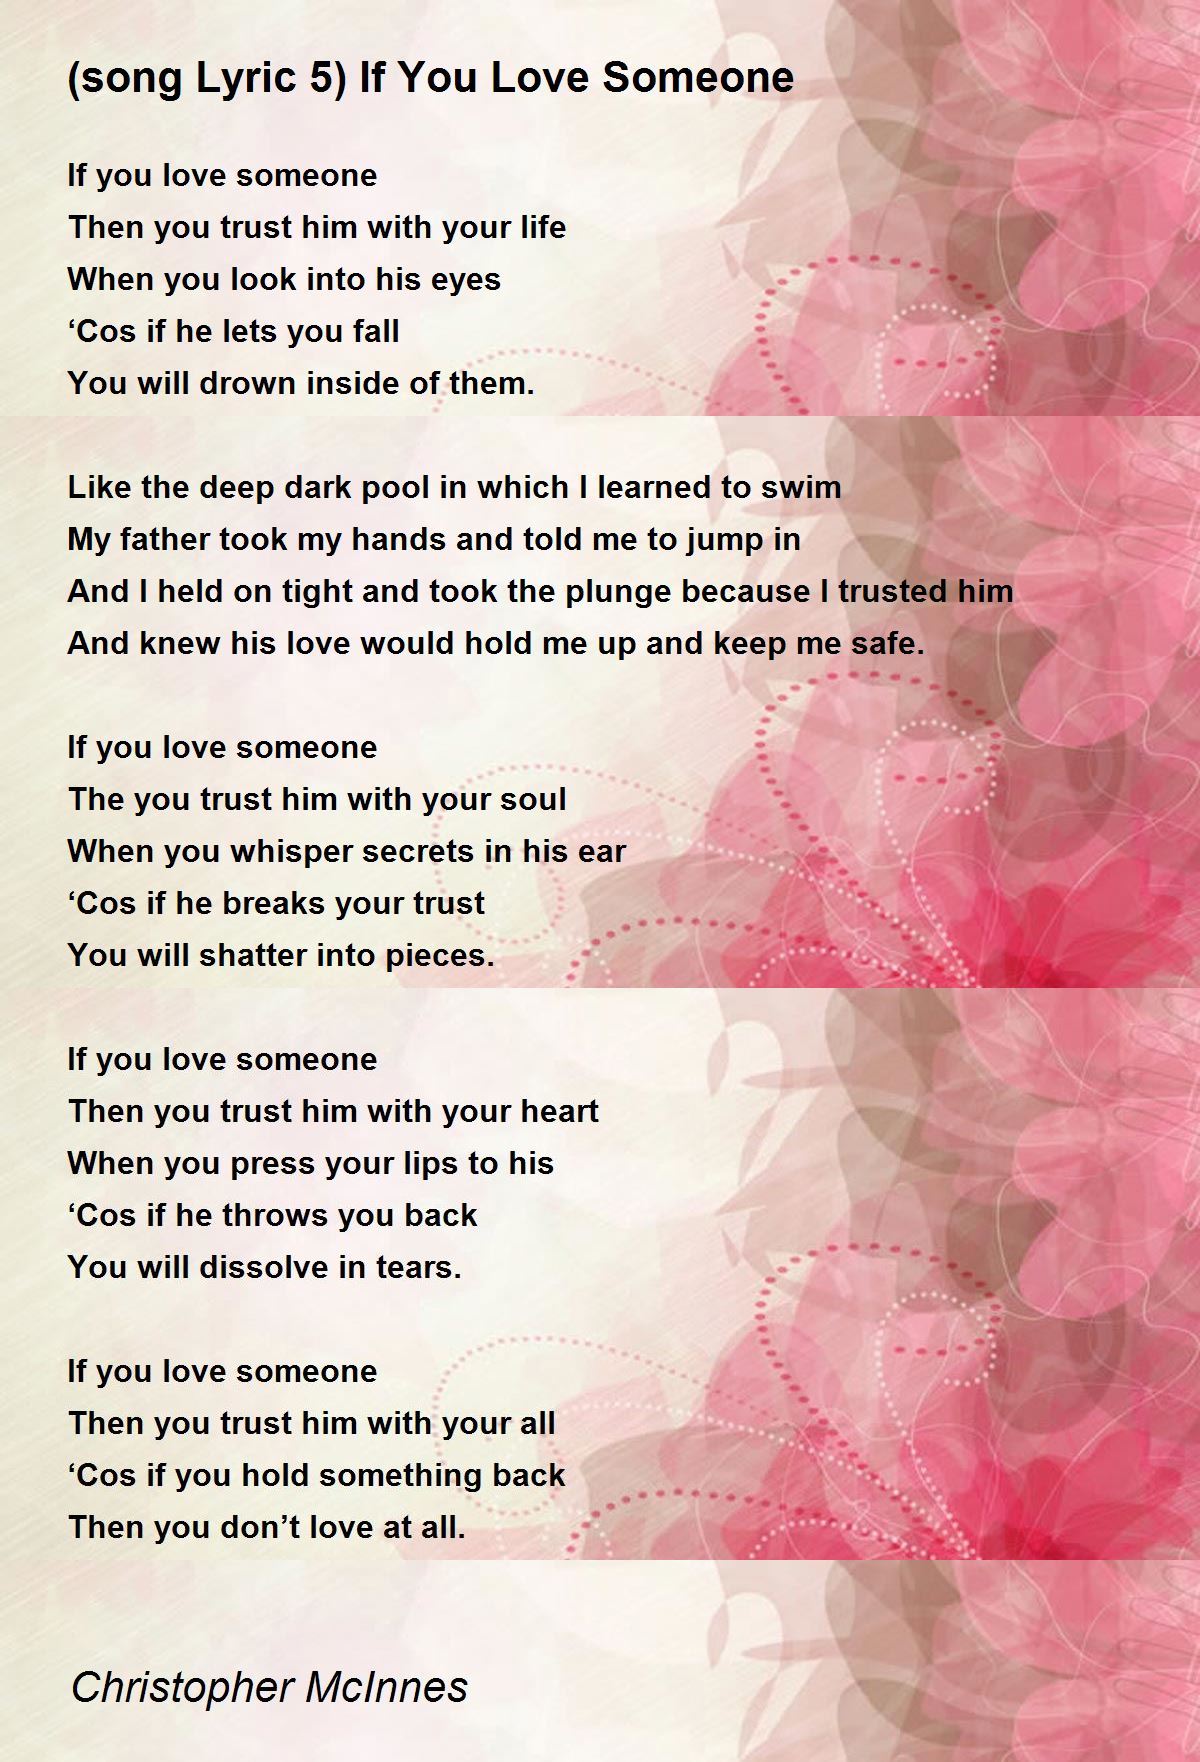 song Lyric 5) If You Love Someone - (song Lyric 5) If You Love Someone Poem  by Christopher McInnes